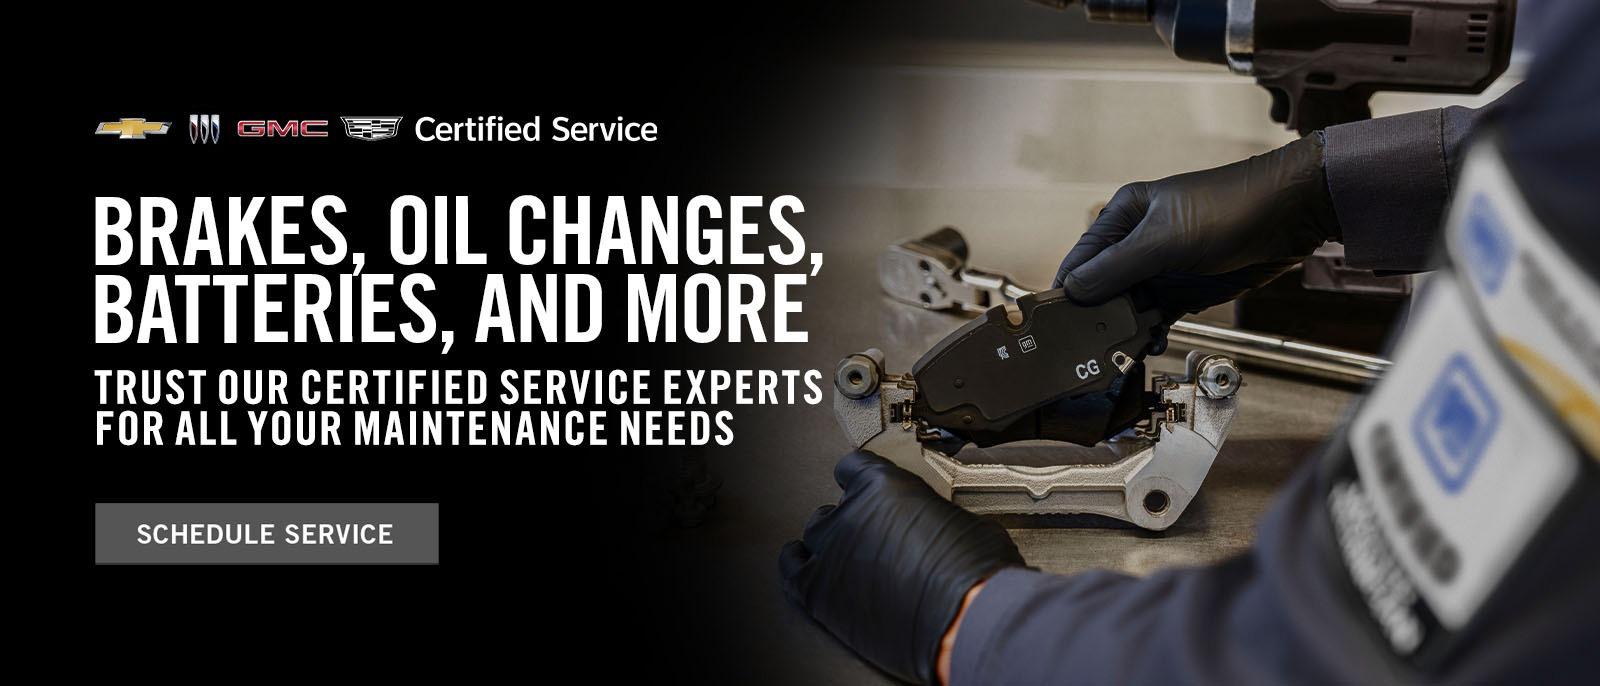 Trust Our Certified Service Experts For All Your Maintenance Needs